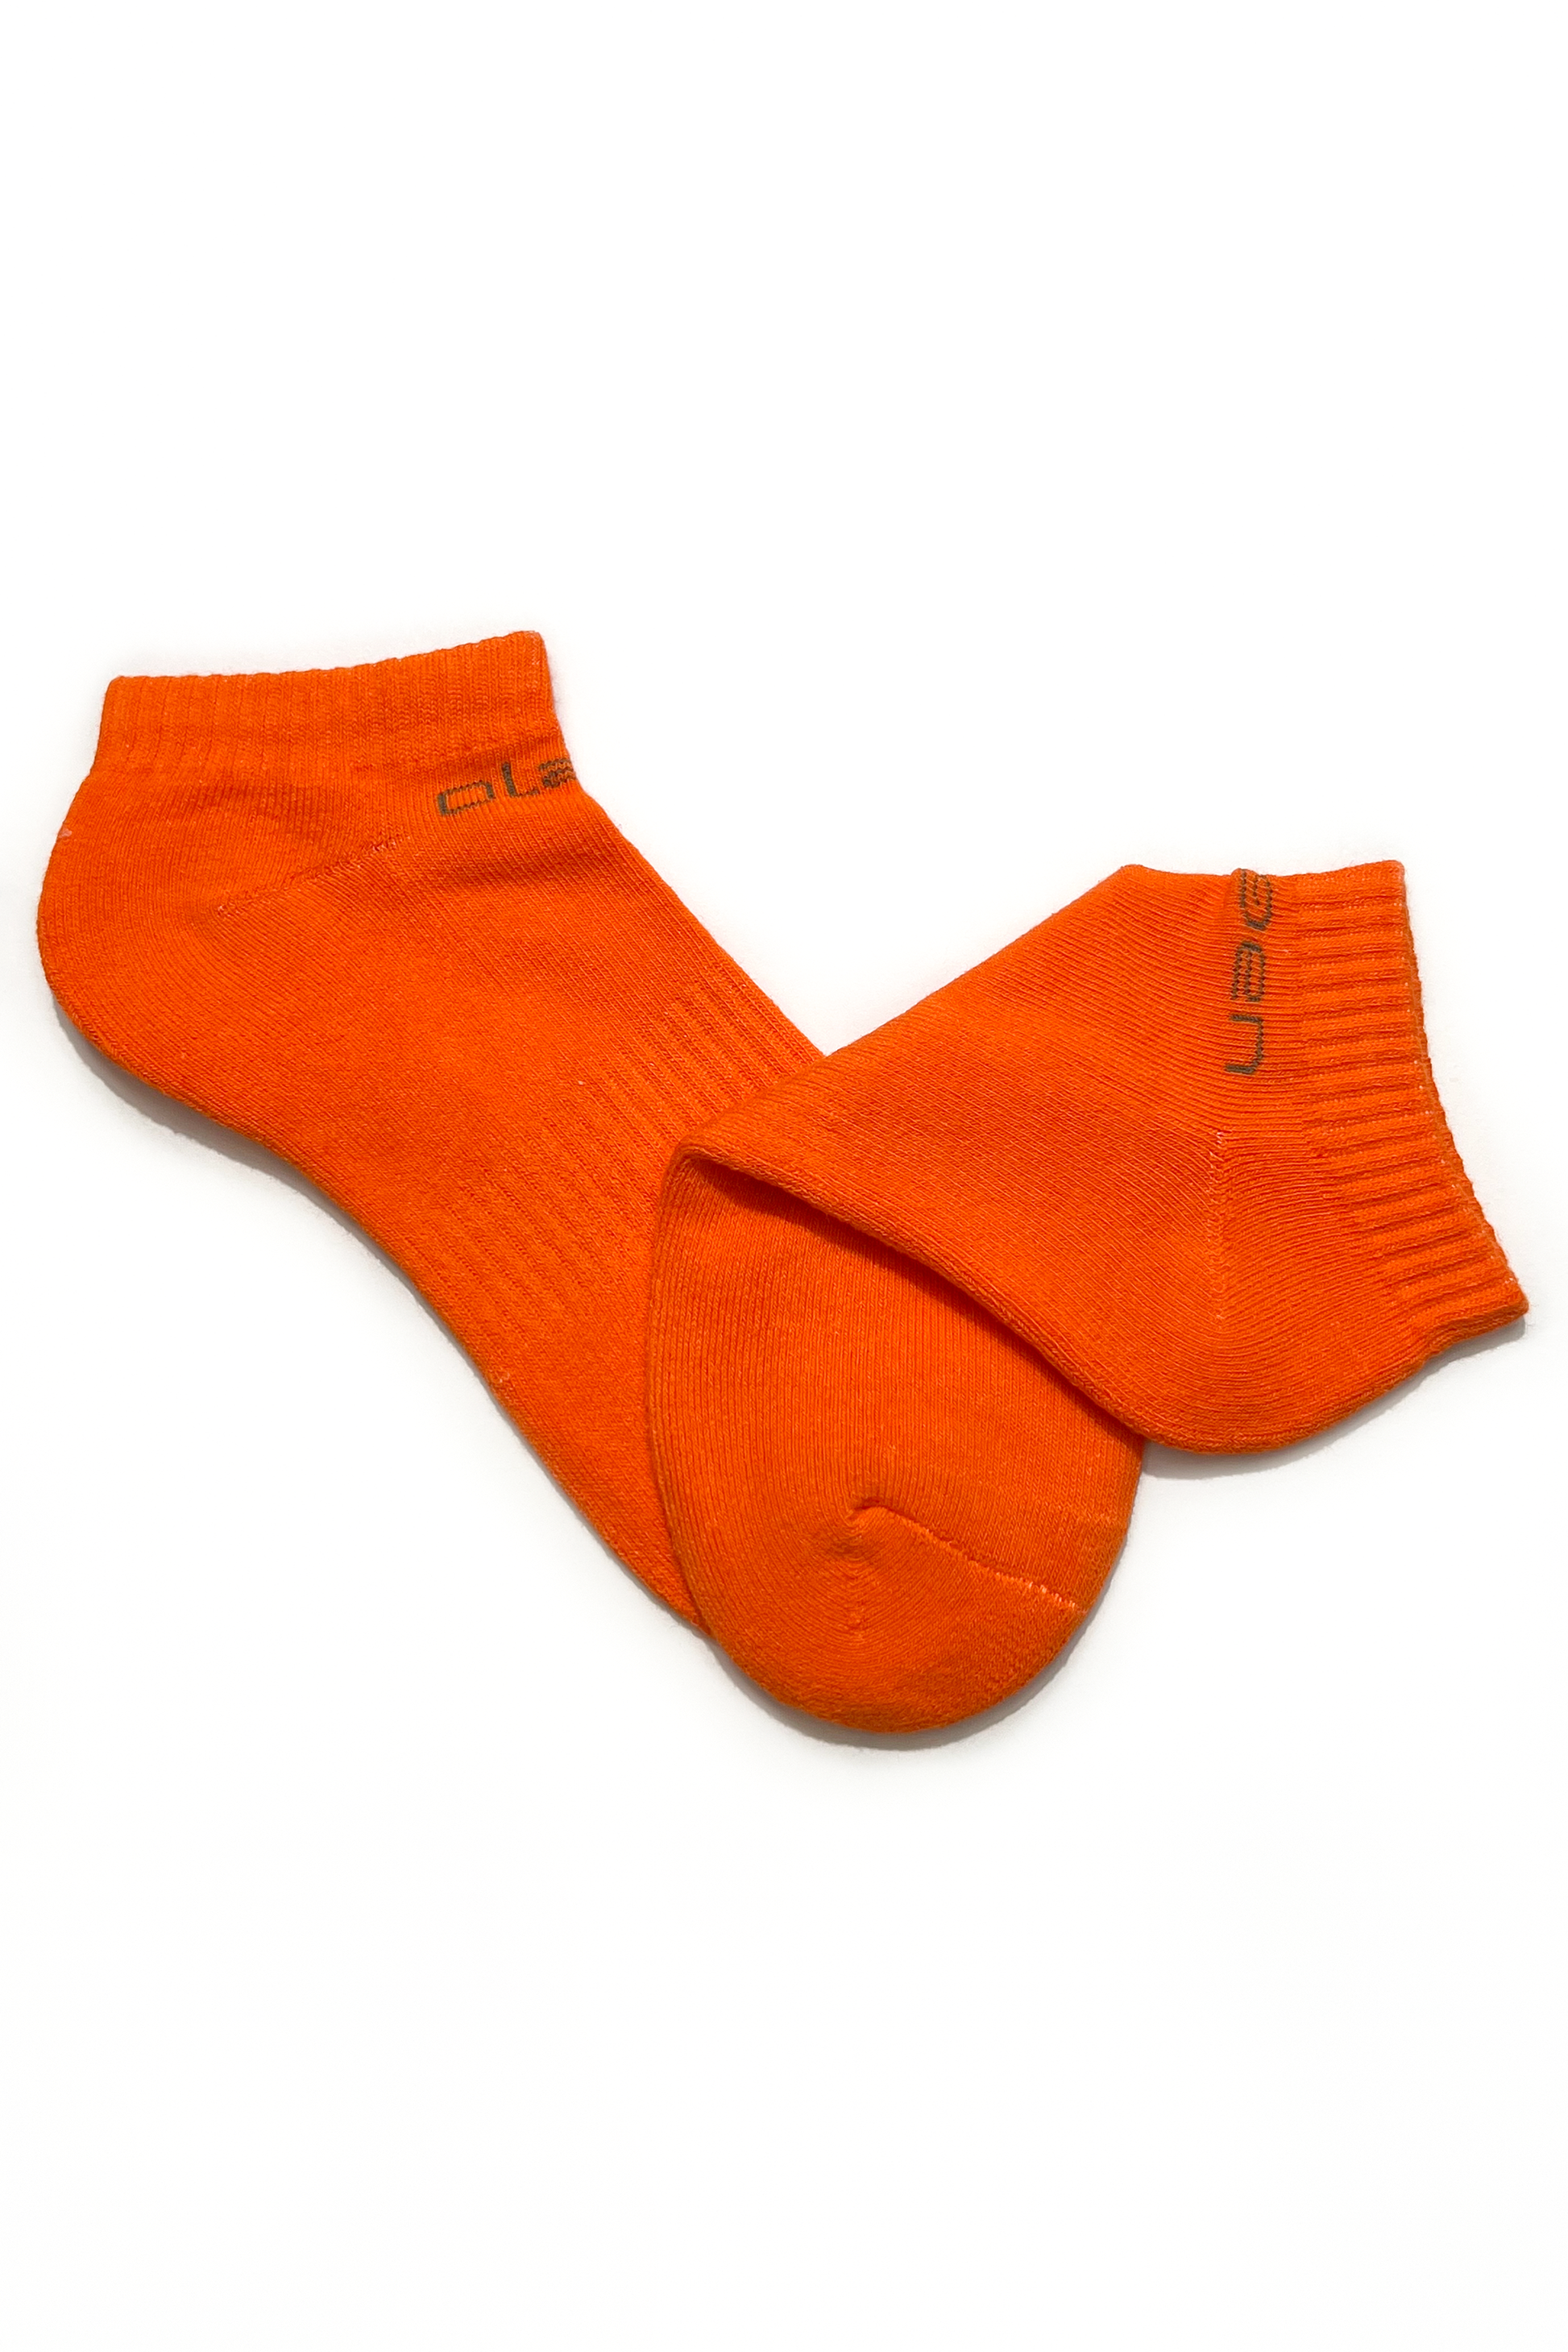 Colorful fall fantasy socks with a short kissy design in vibrant orange - OW-0152-USO-OR_6.